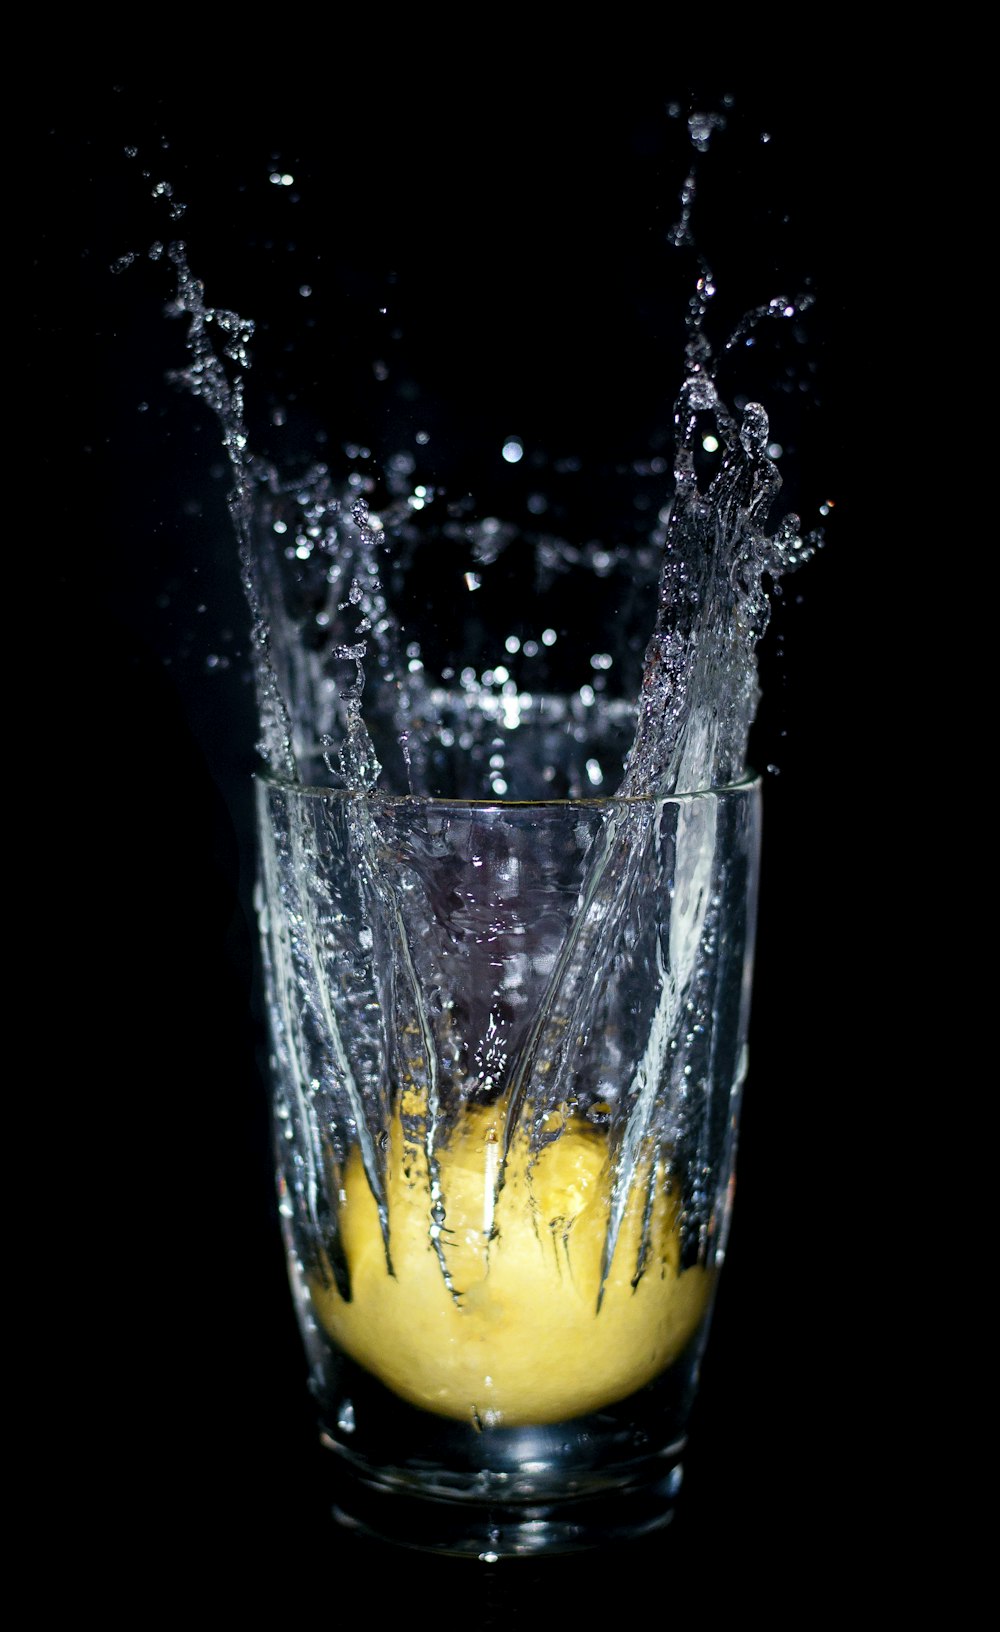 a glass filled with yellow liquid and water